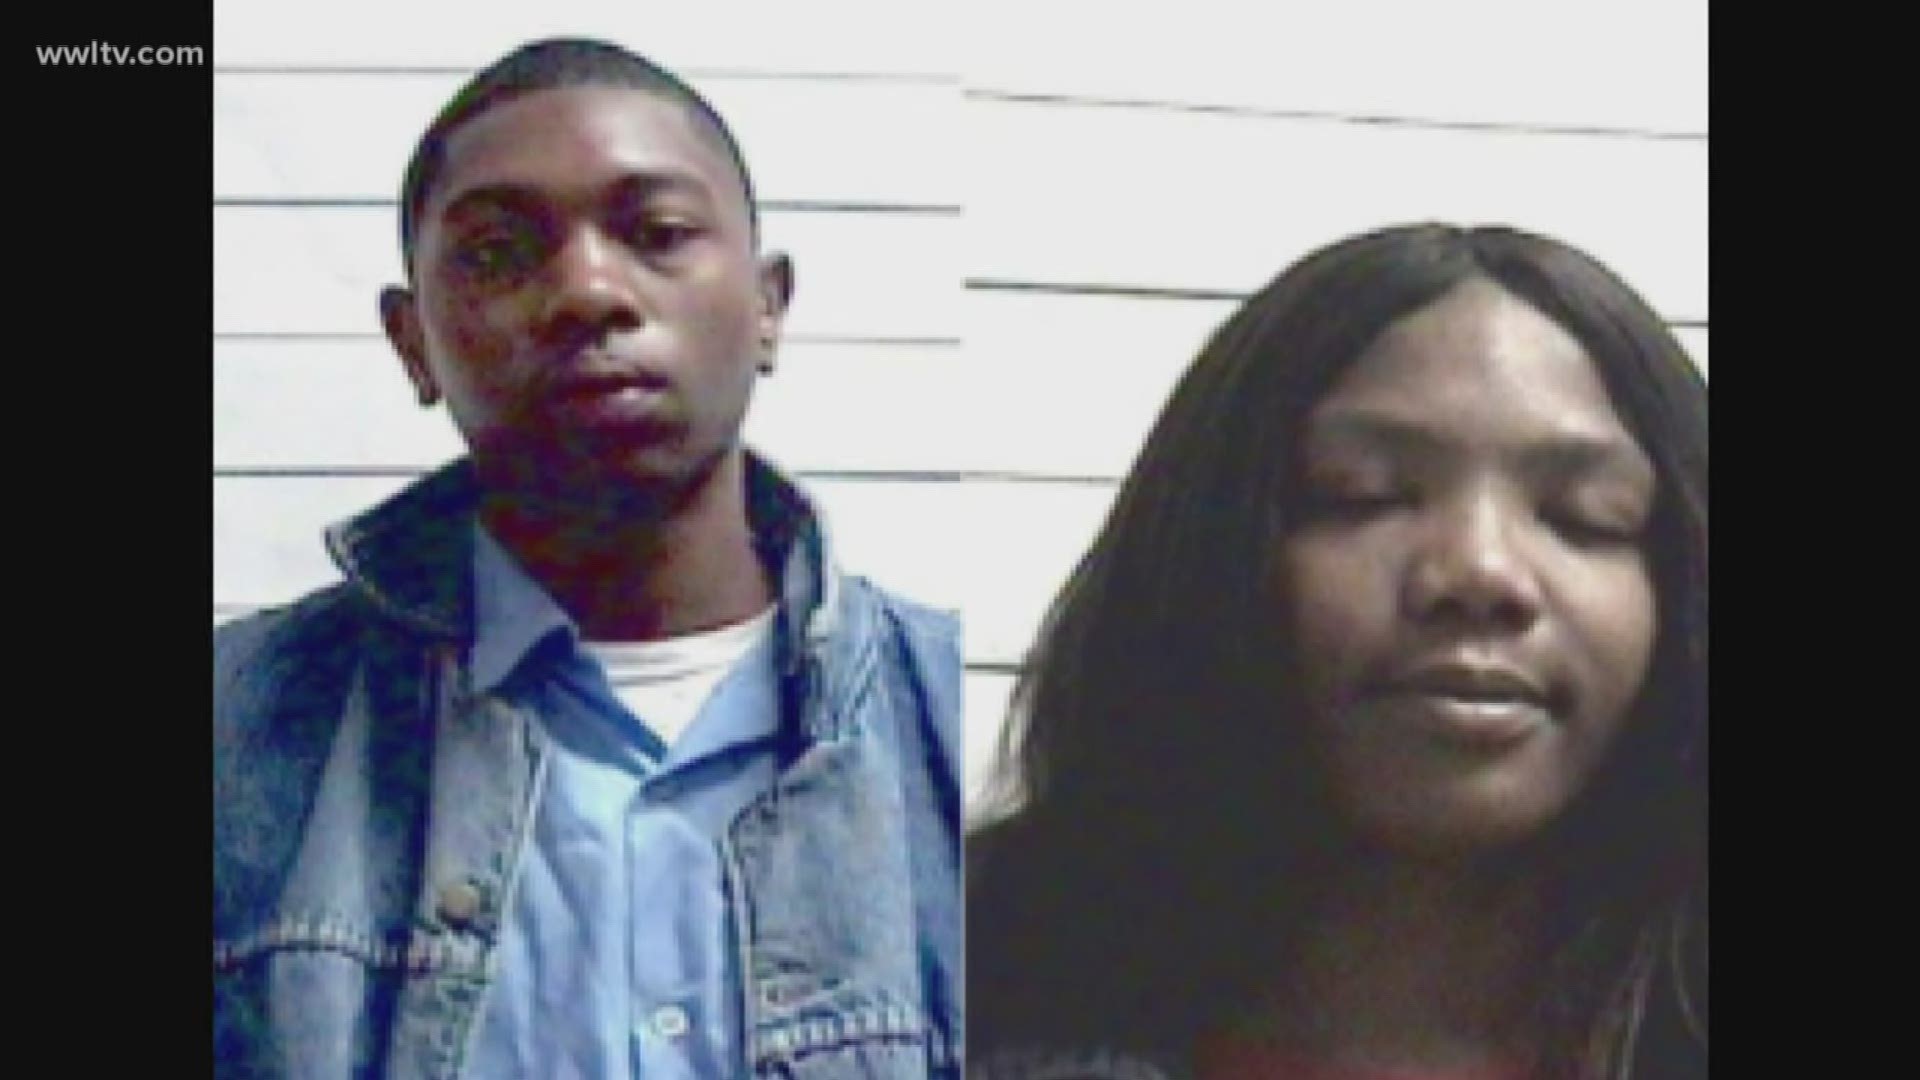 Investigators say the girlfriend ordered her boyfriend to shoot the man following a fight.